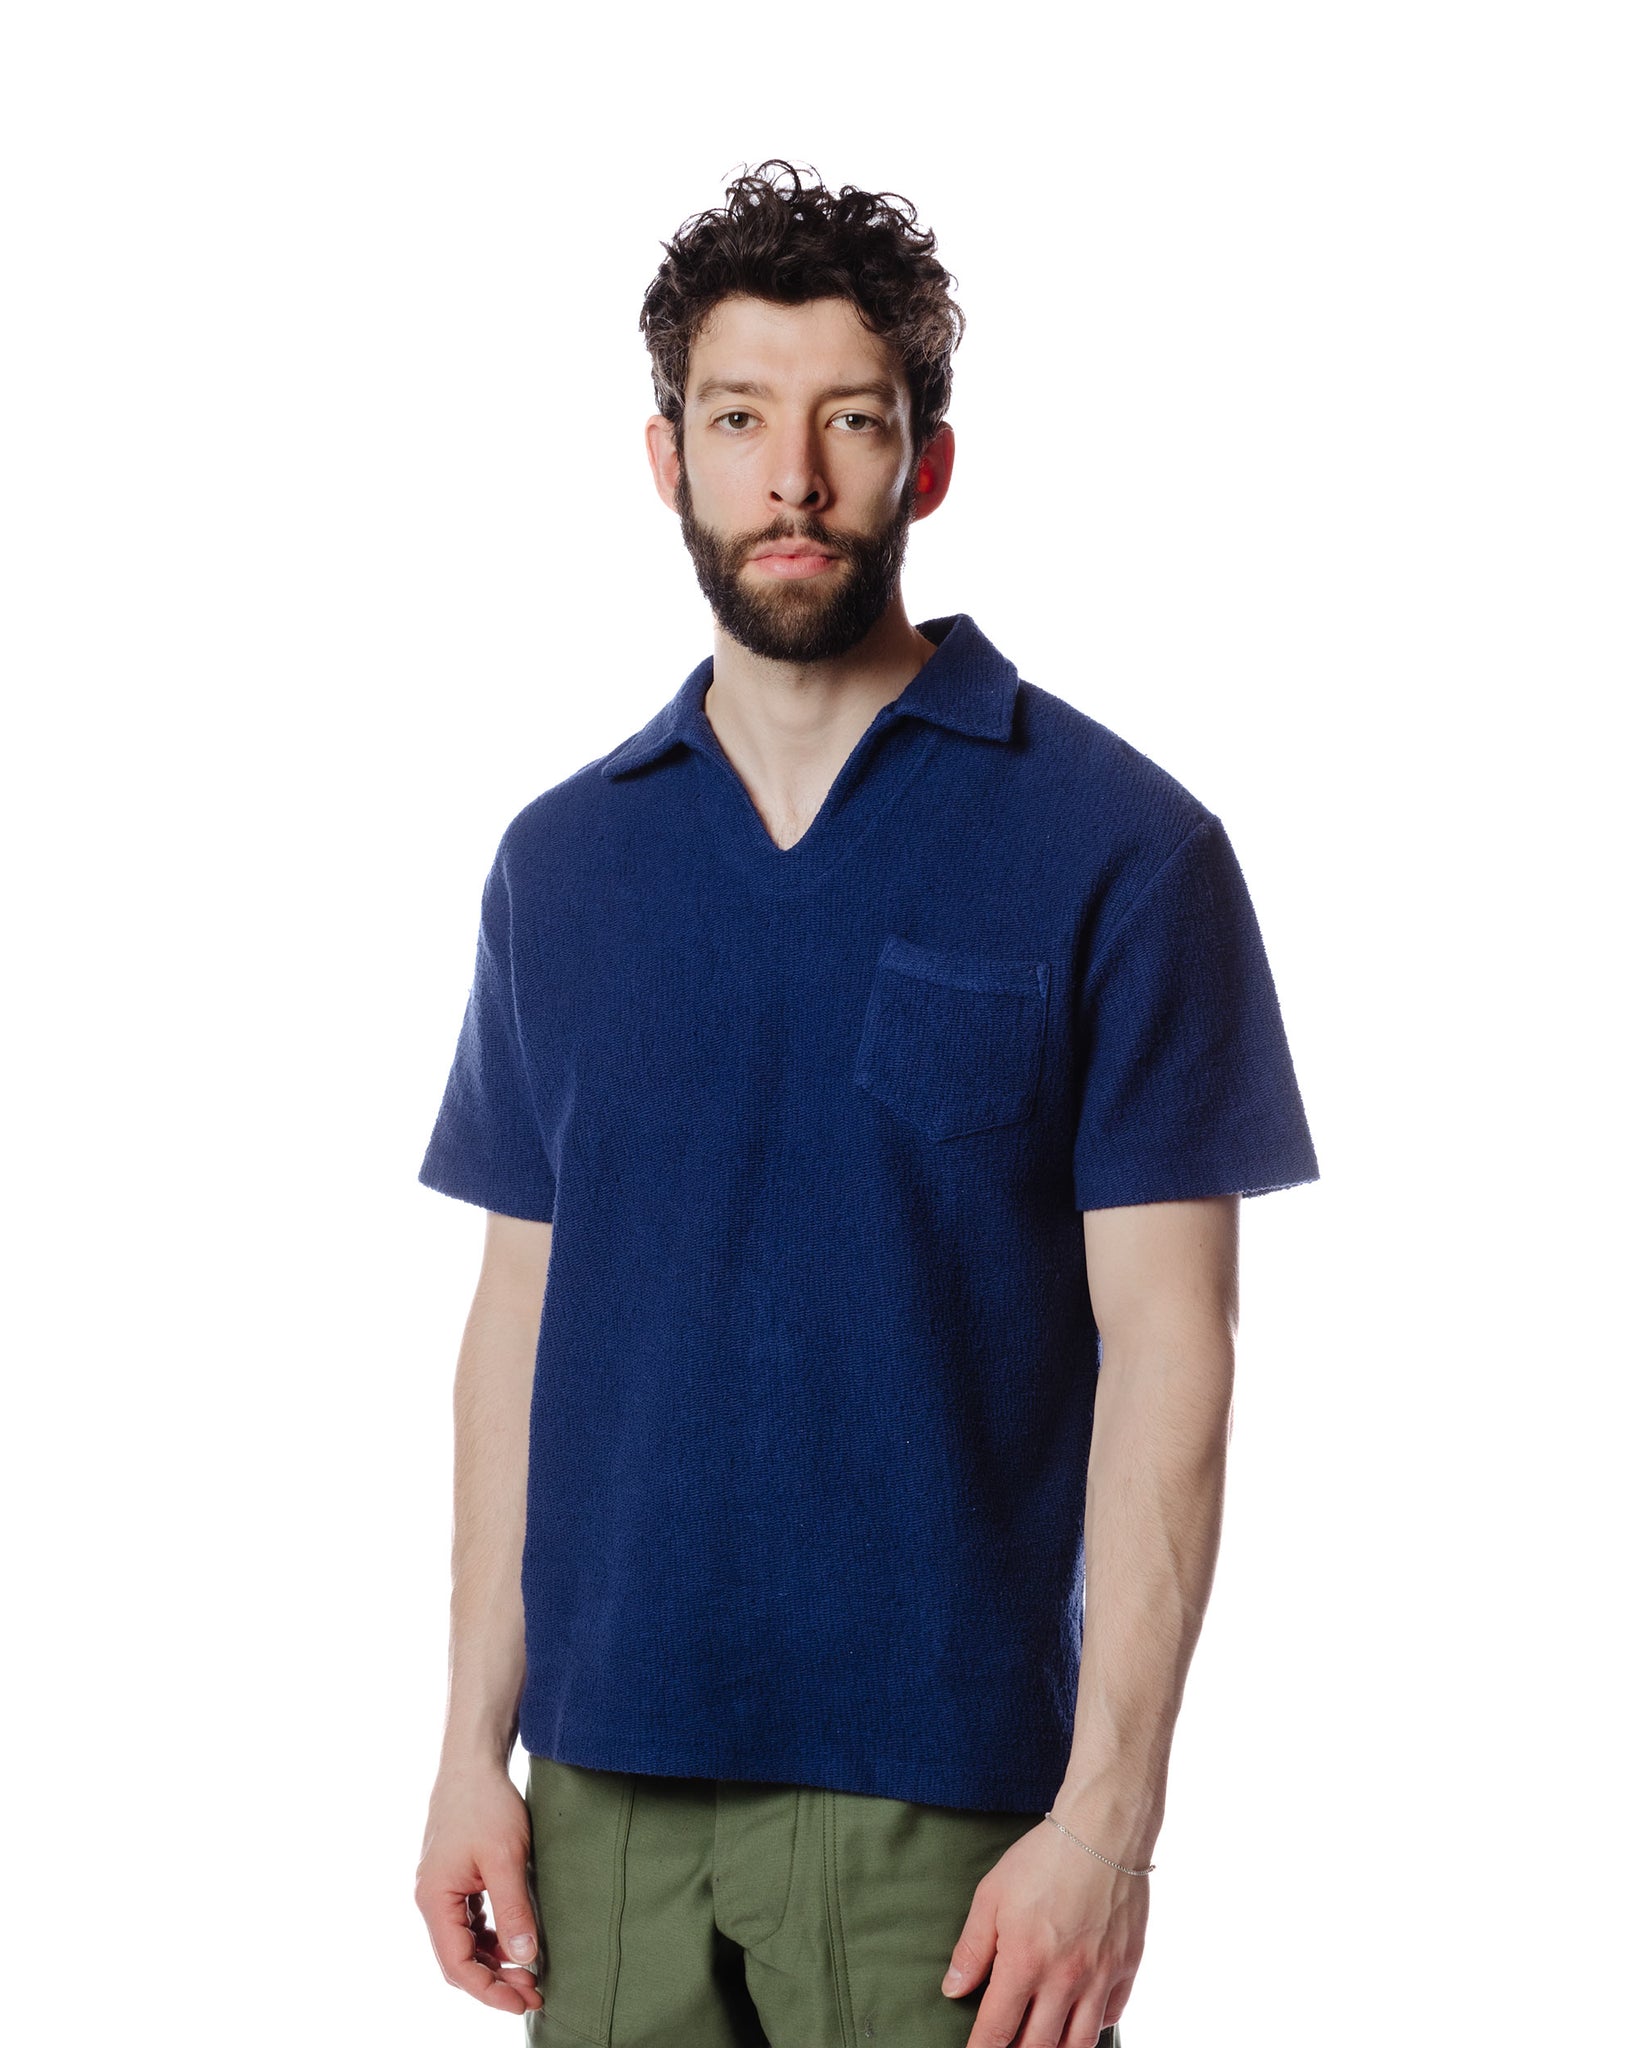 The Real McCoy's MC23017 Cotton Pile Skipper Navy Front